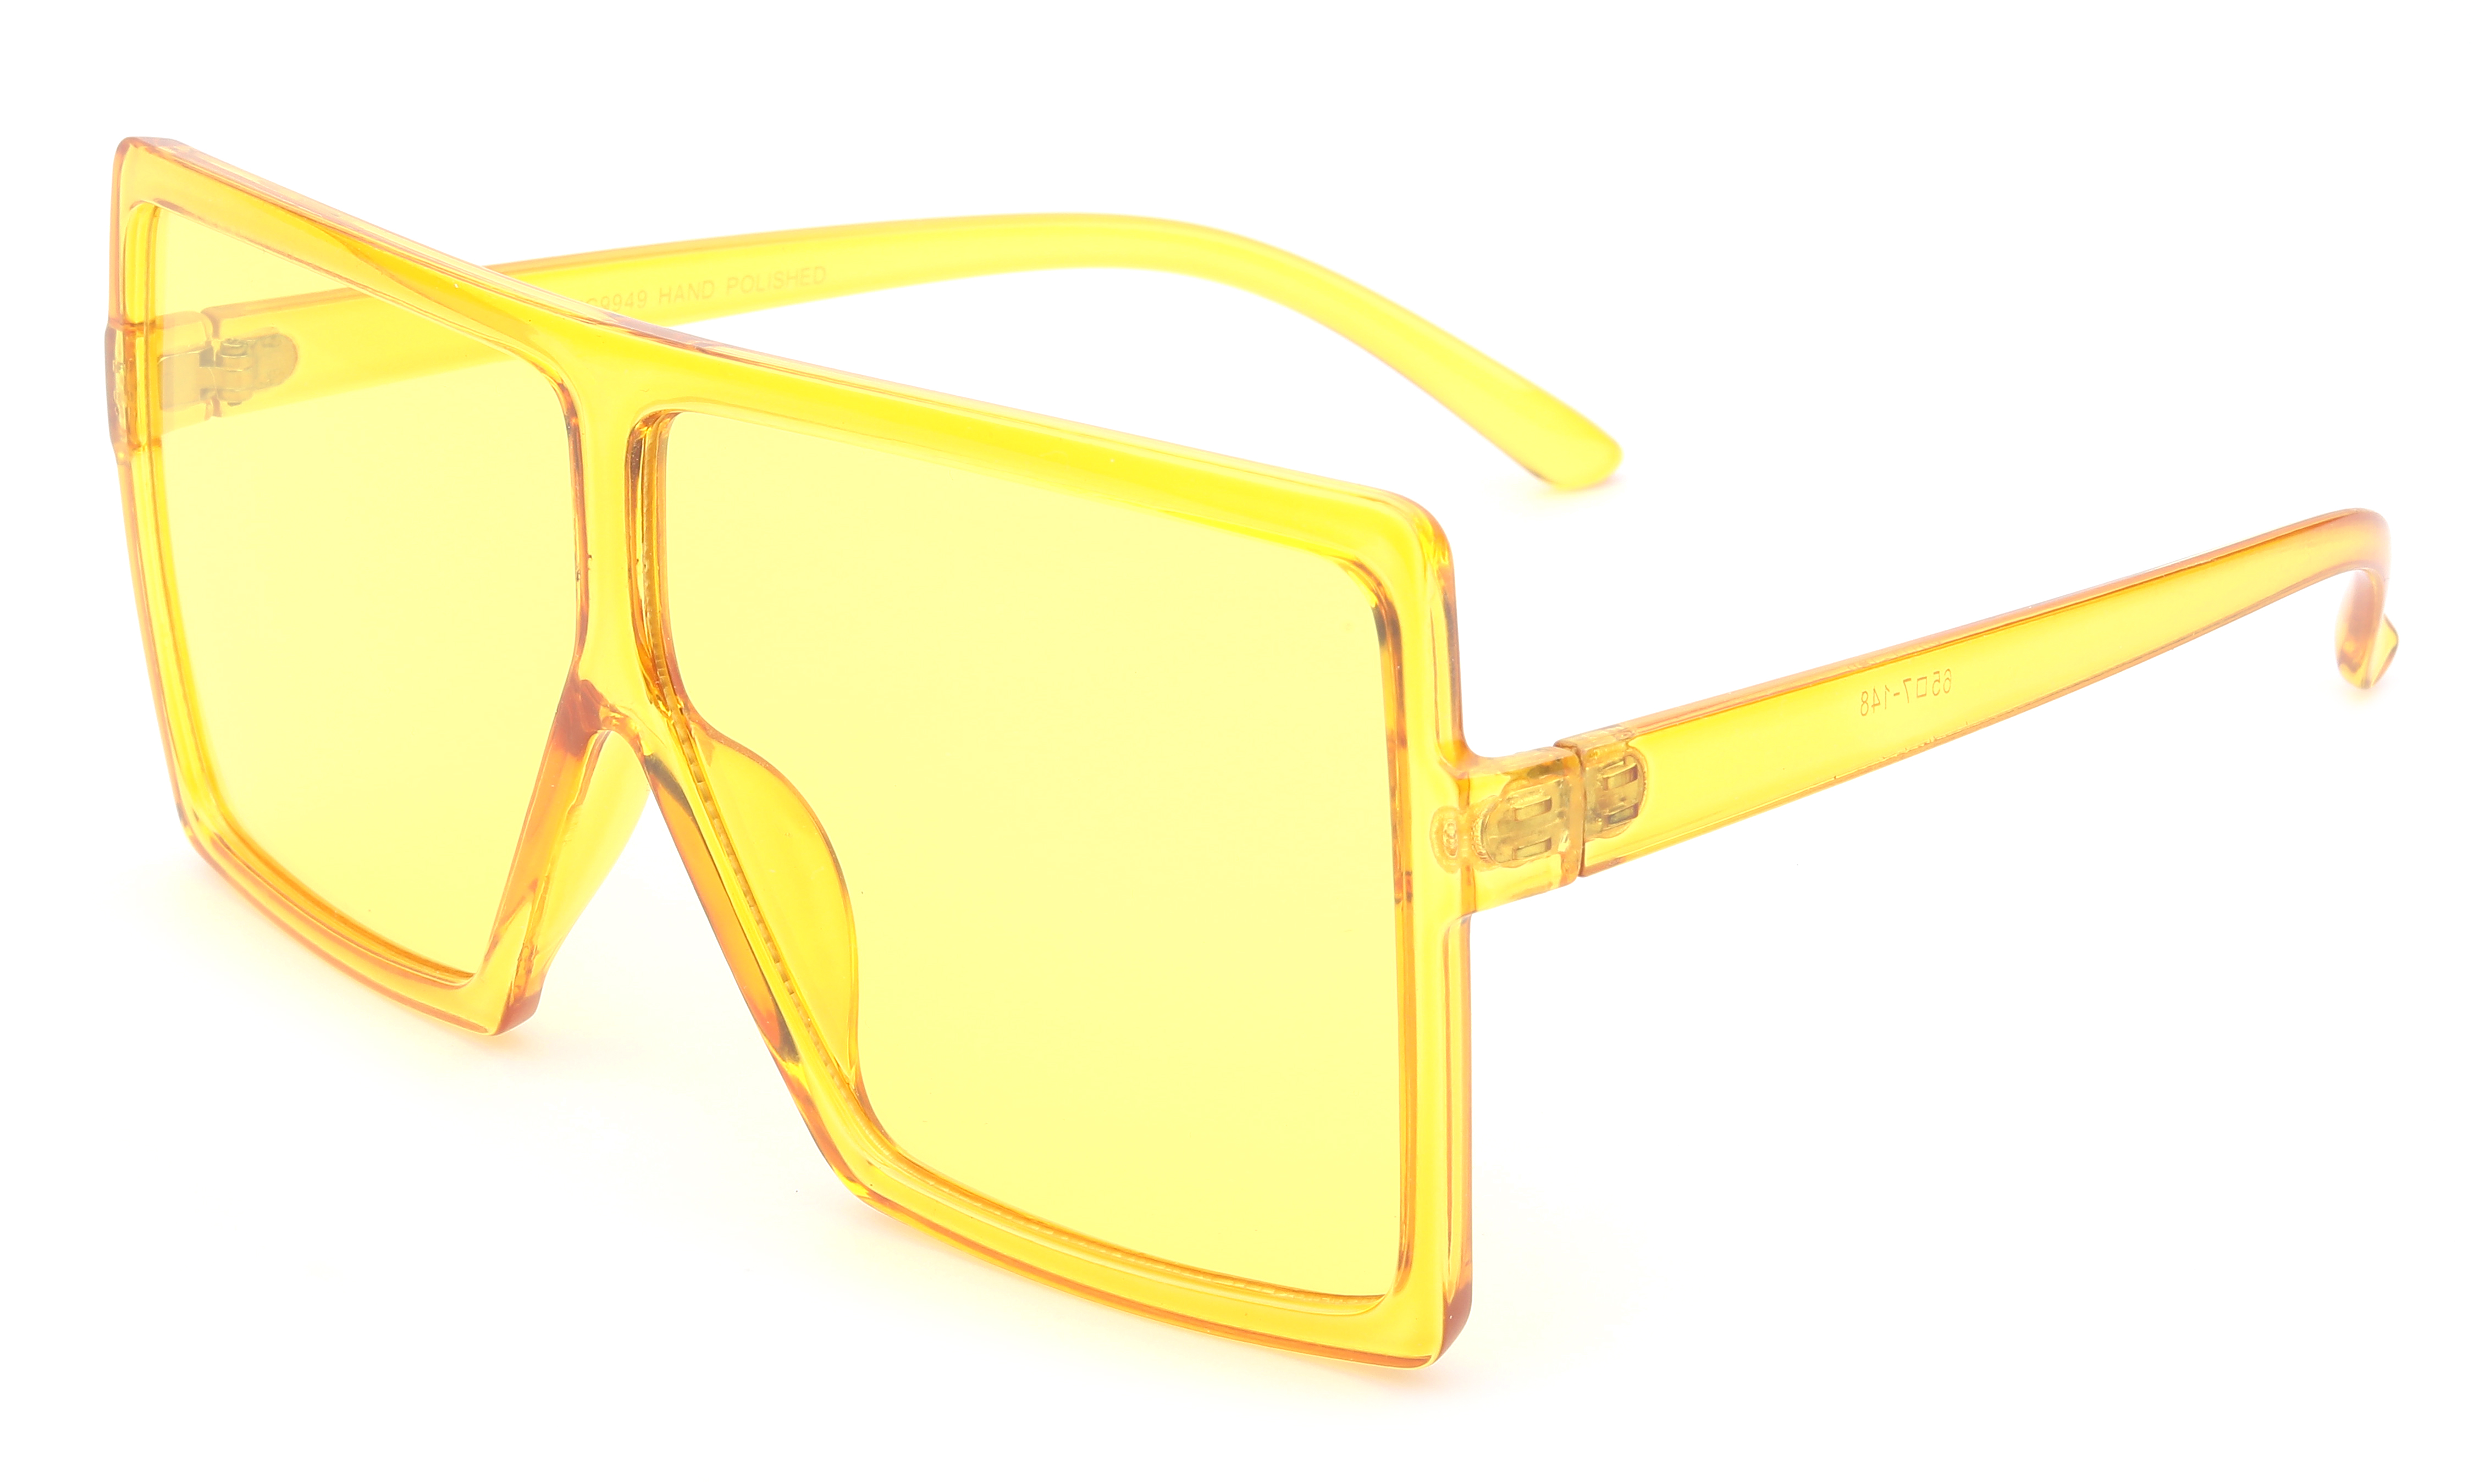 Newbee Fashion Square Vintage Oversized Large Frame Fashion Sunglasses for Women, Men, Junior Teen, Rectangle Flat Top Composite Frame, Big Wind Shield Lens, UV 400, Yellow Frame Yellow Lens - image 1 of 2